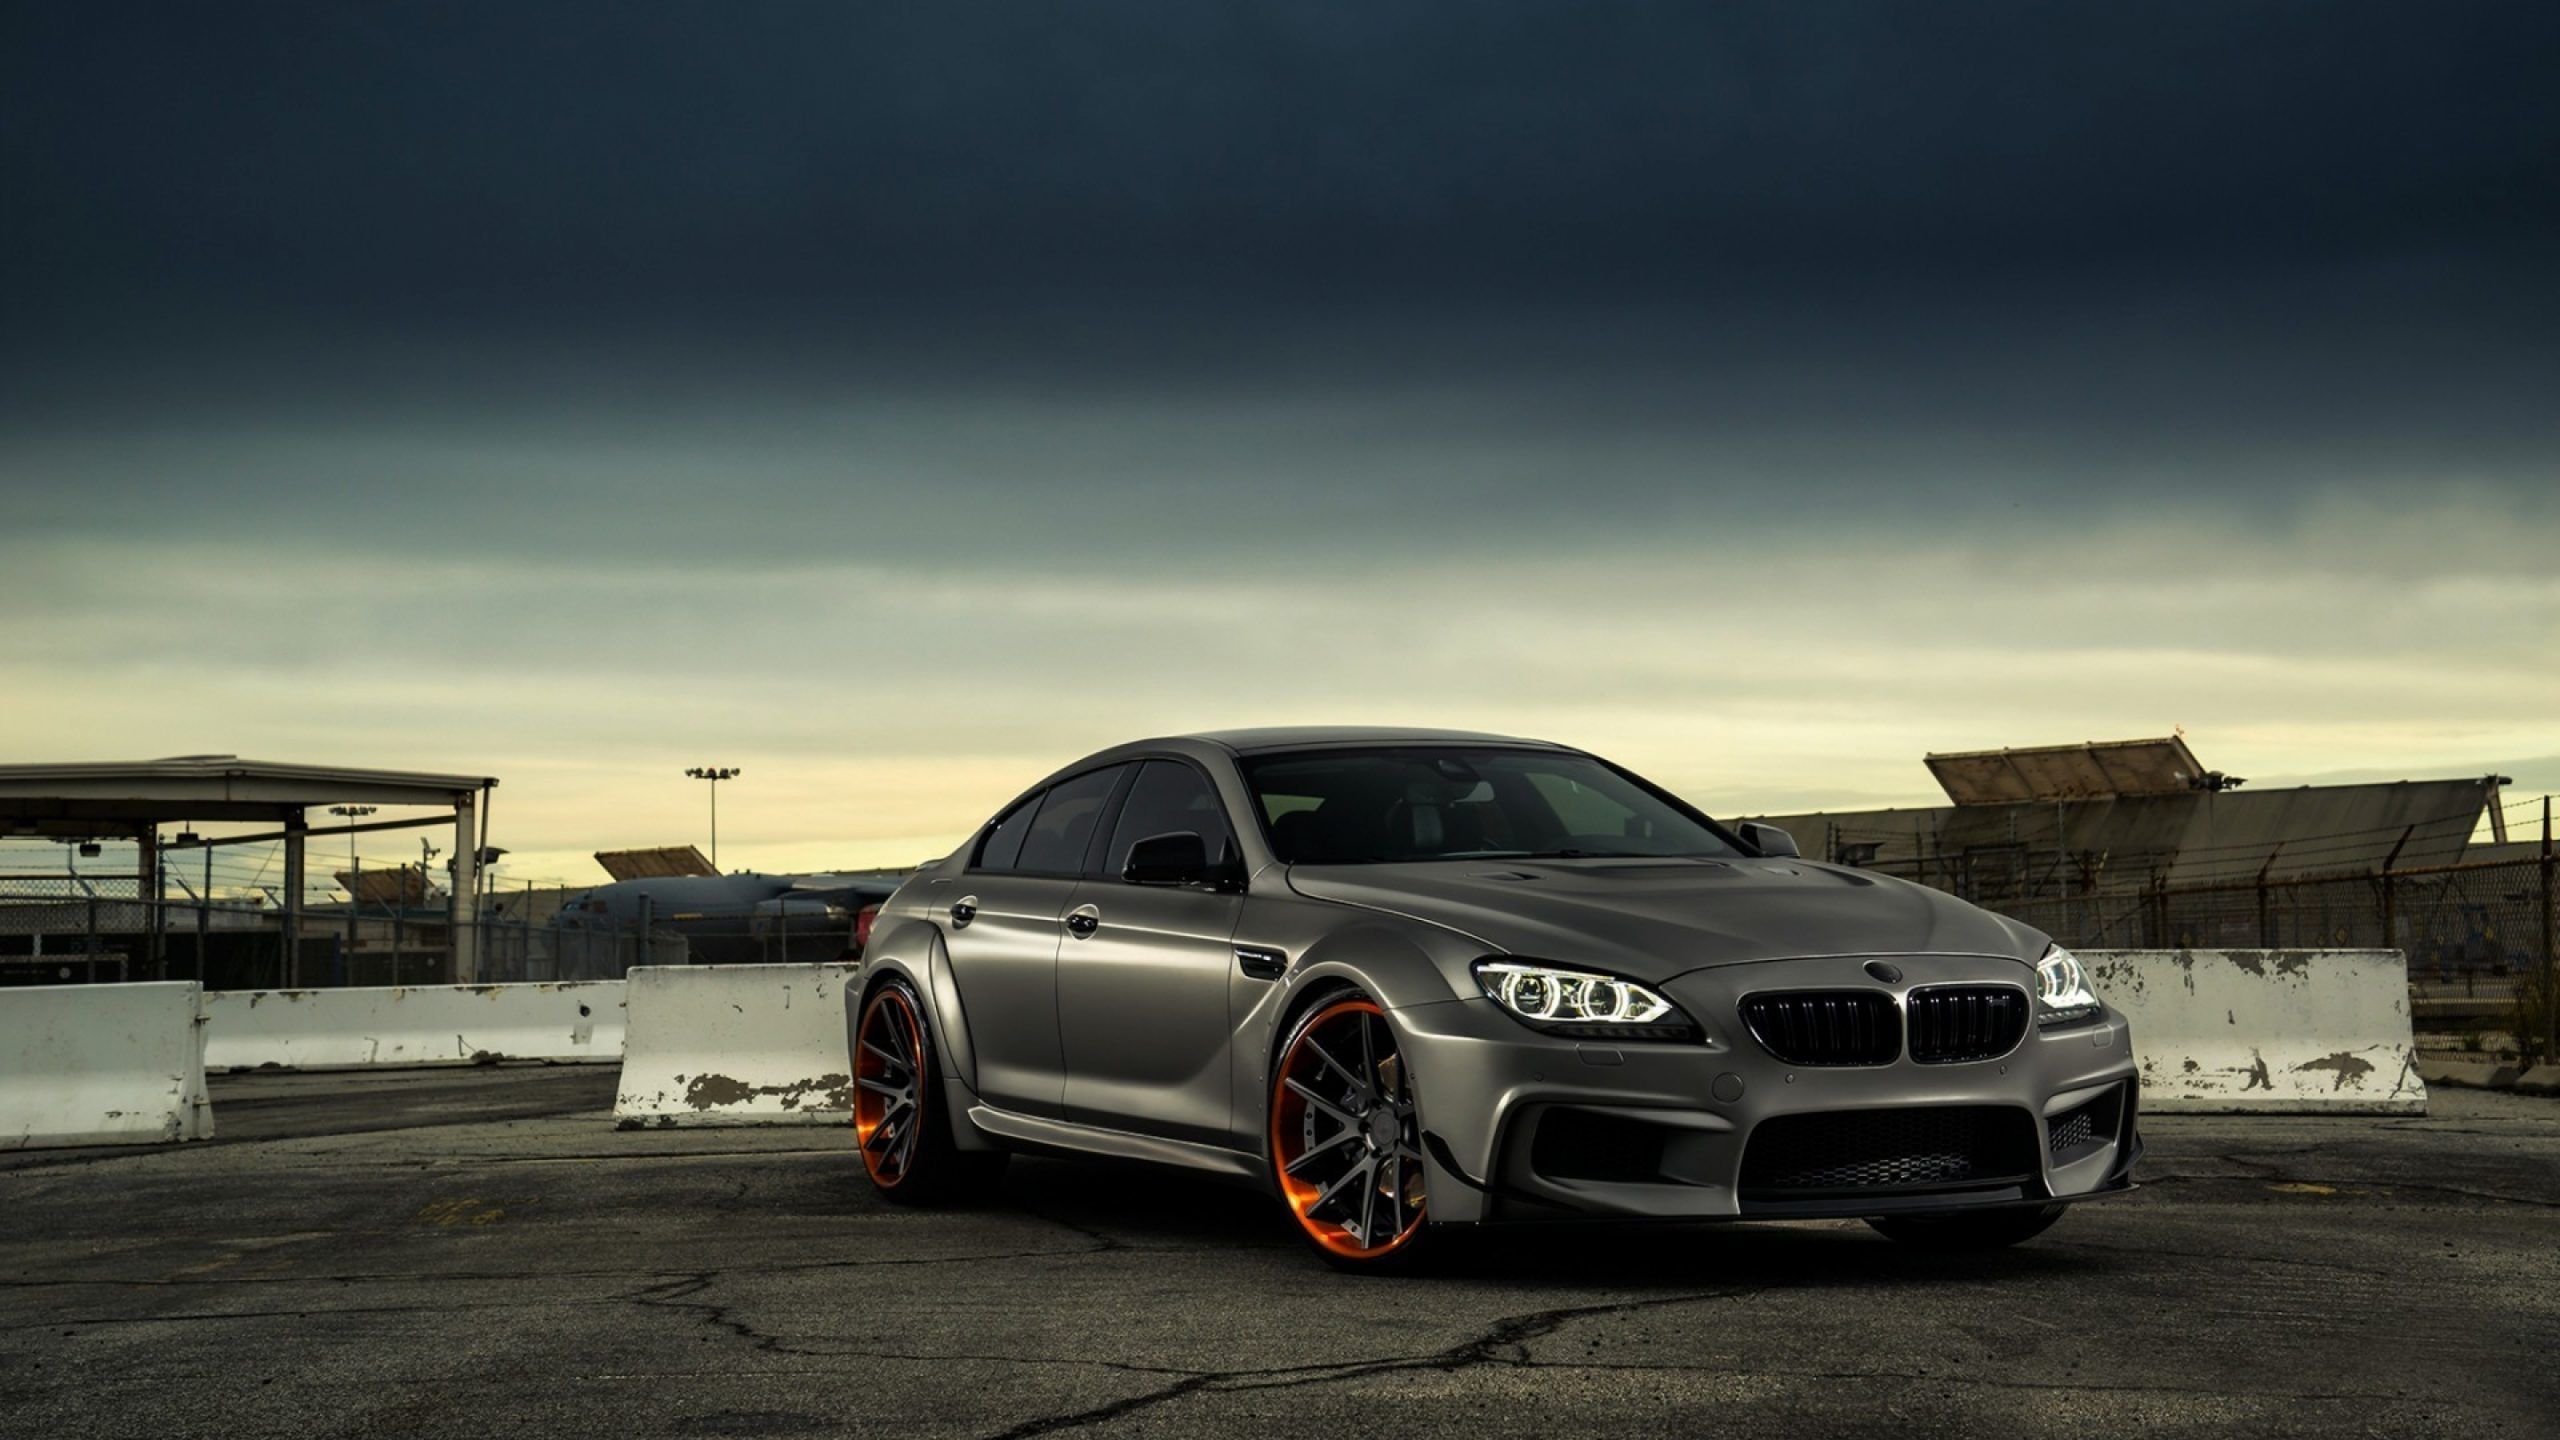 4K BMW Wallpapers   Top Free 4K BMW Backgrounds